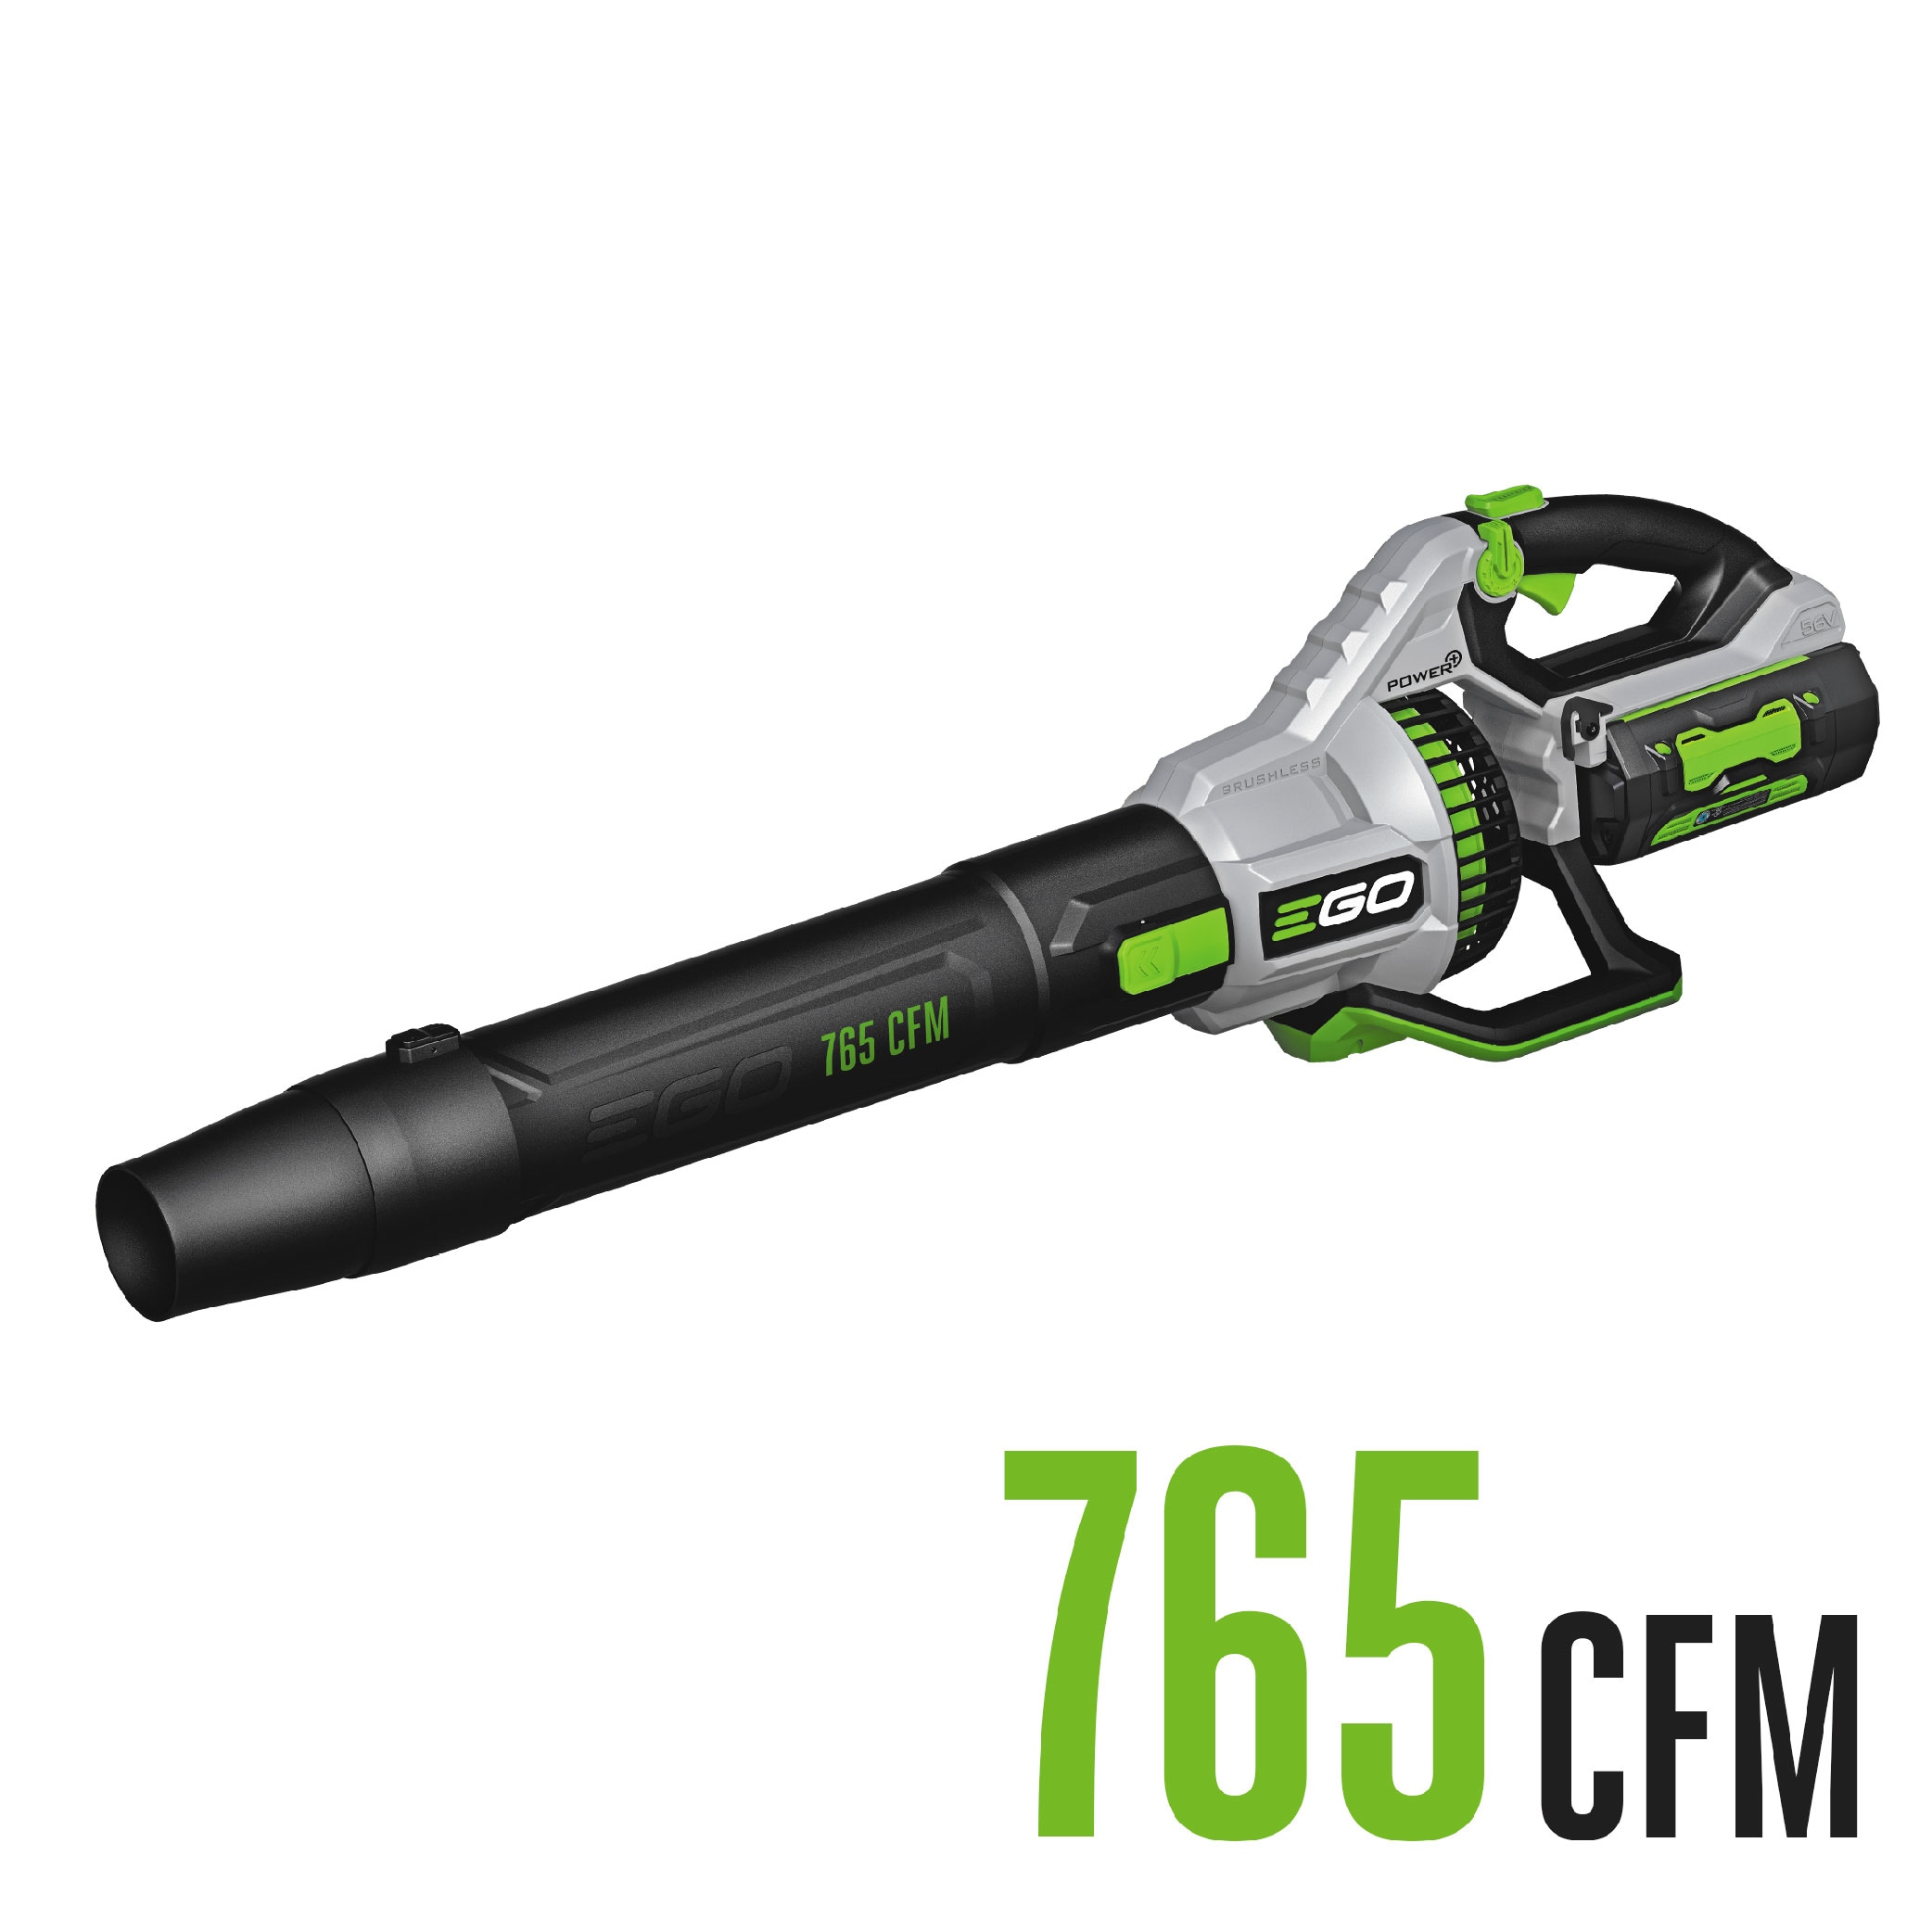 EGO POWER+ 56-volt 765-CFM 200-MPH Battery Handheld Leaf Blower 5 Ah (Battery & Charger)  $299 -  plus FREE gift with purchase - extra additional battery! at Lowes